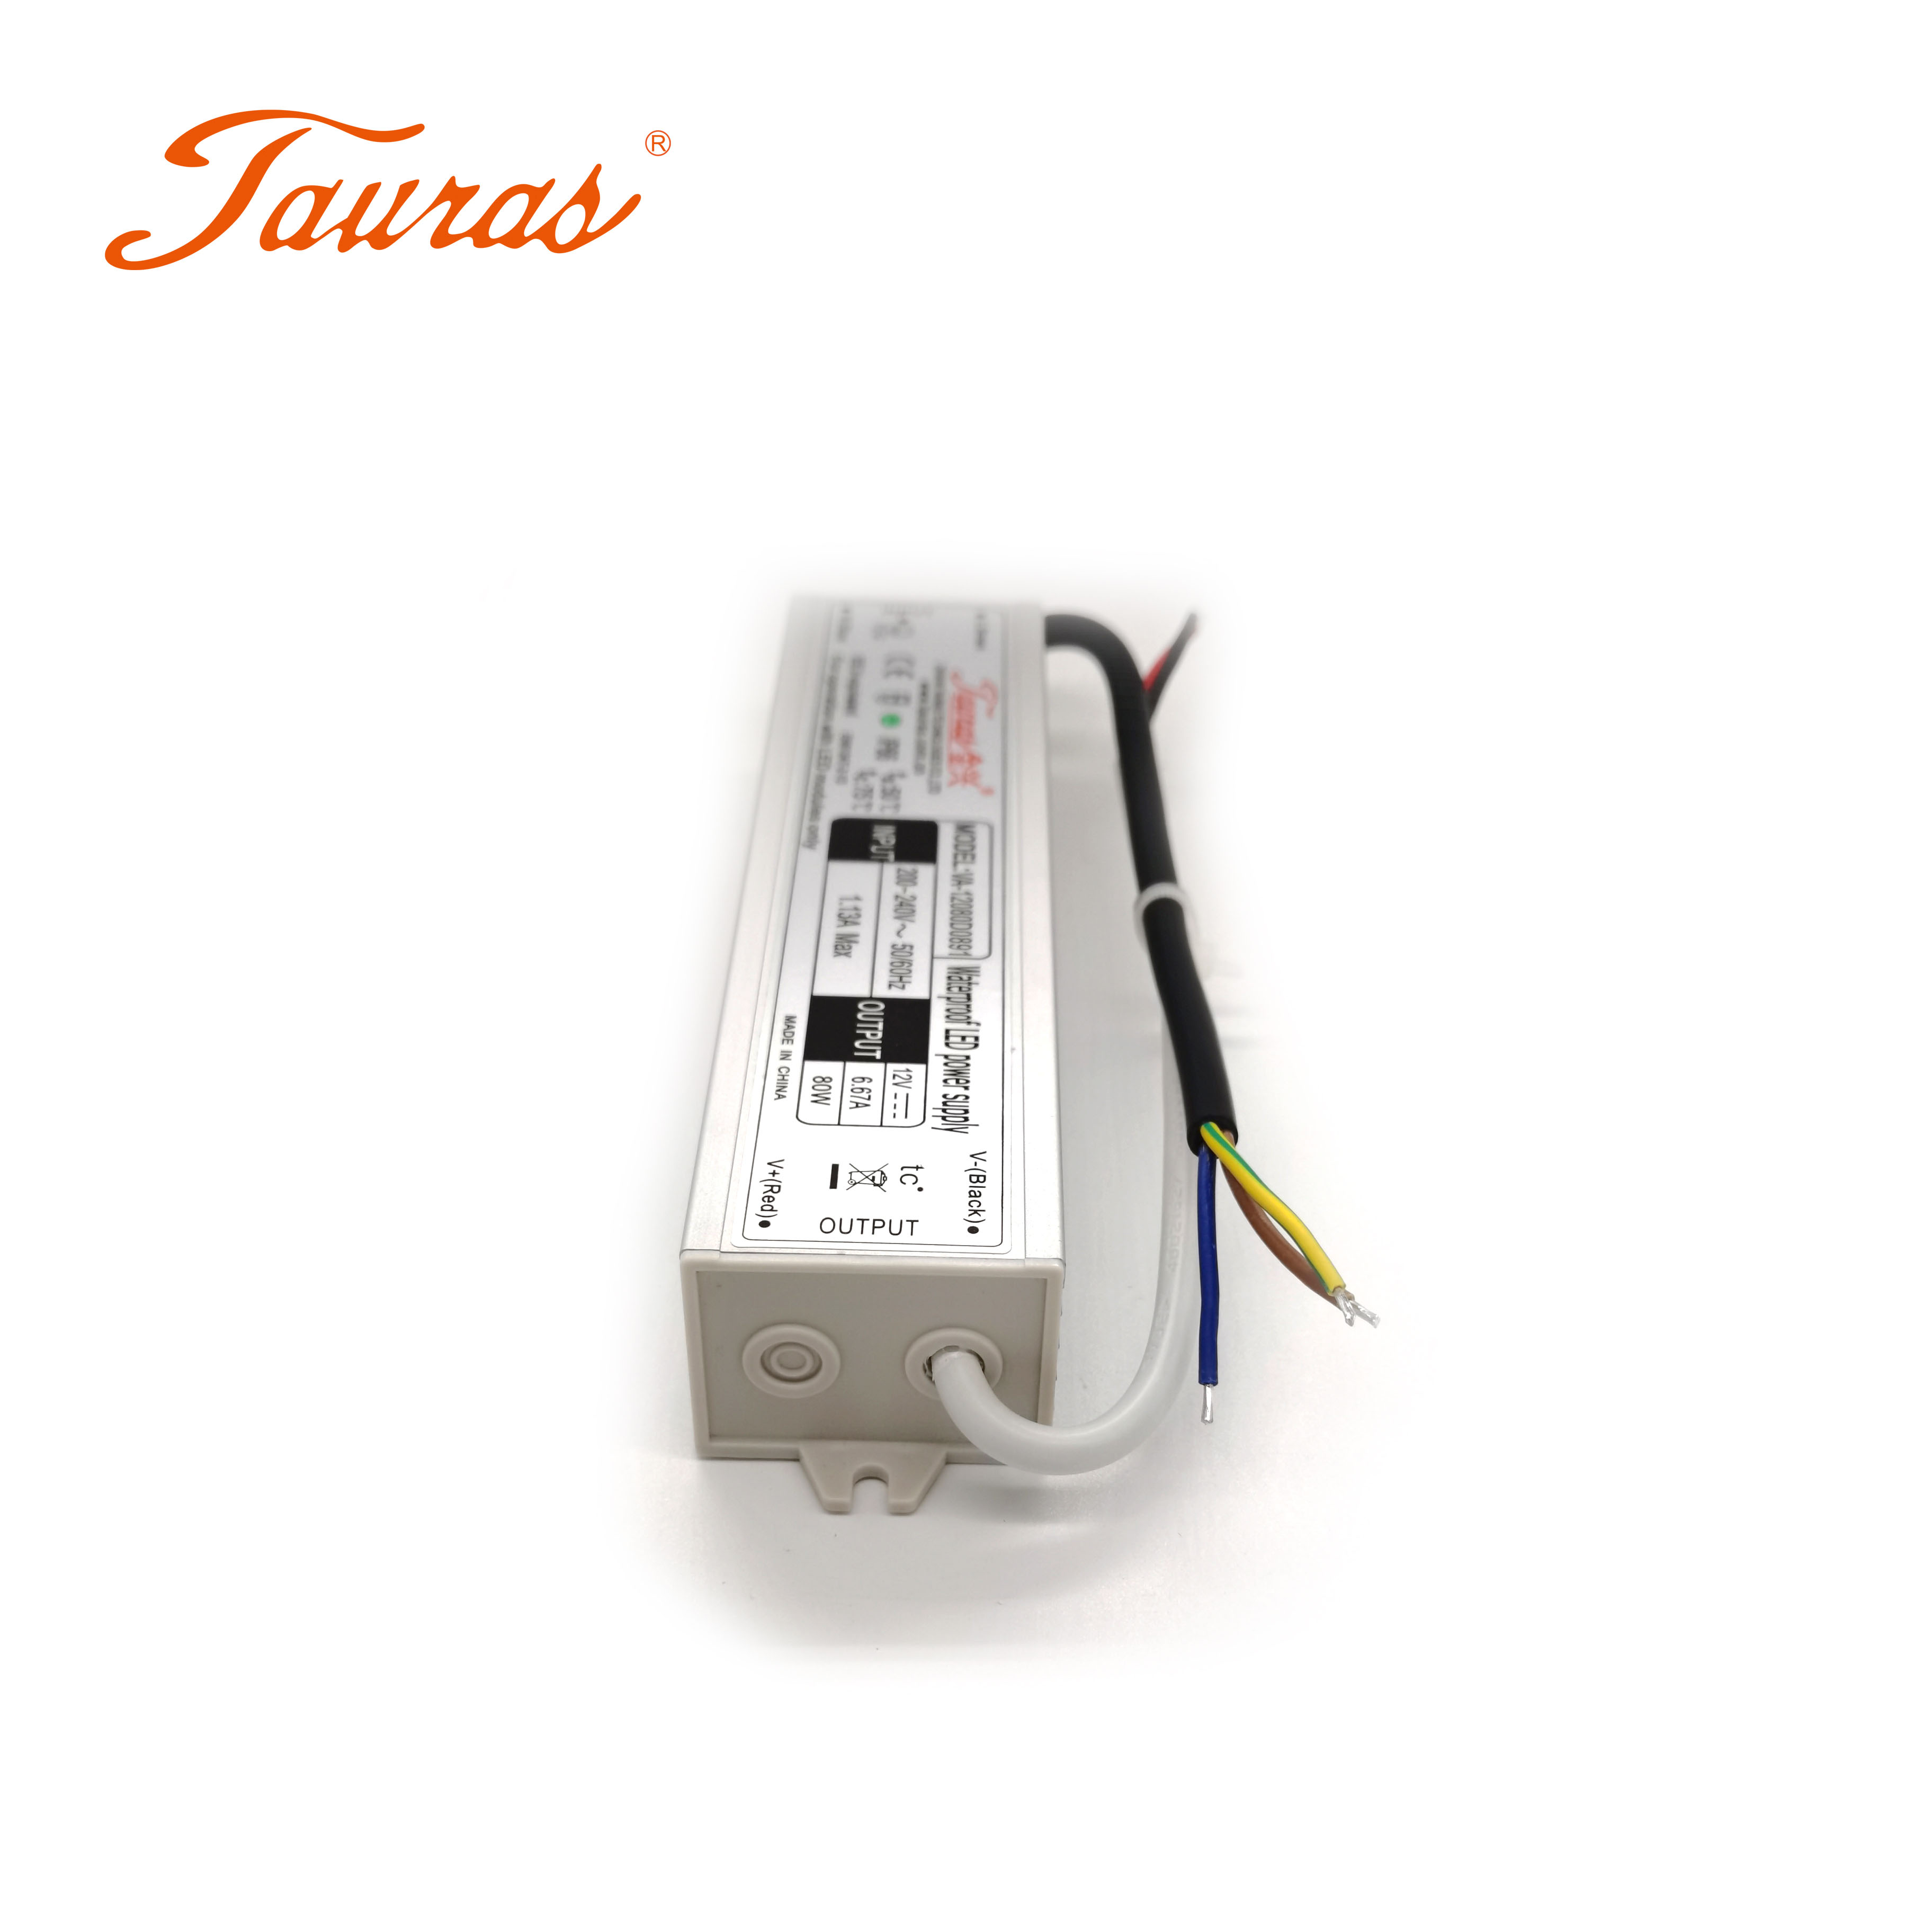 LED-Netzteil 24Vdc 40W 1,67A In-/Outdoor IP67 kaufen